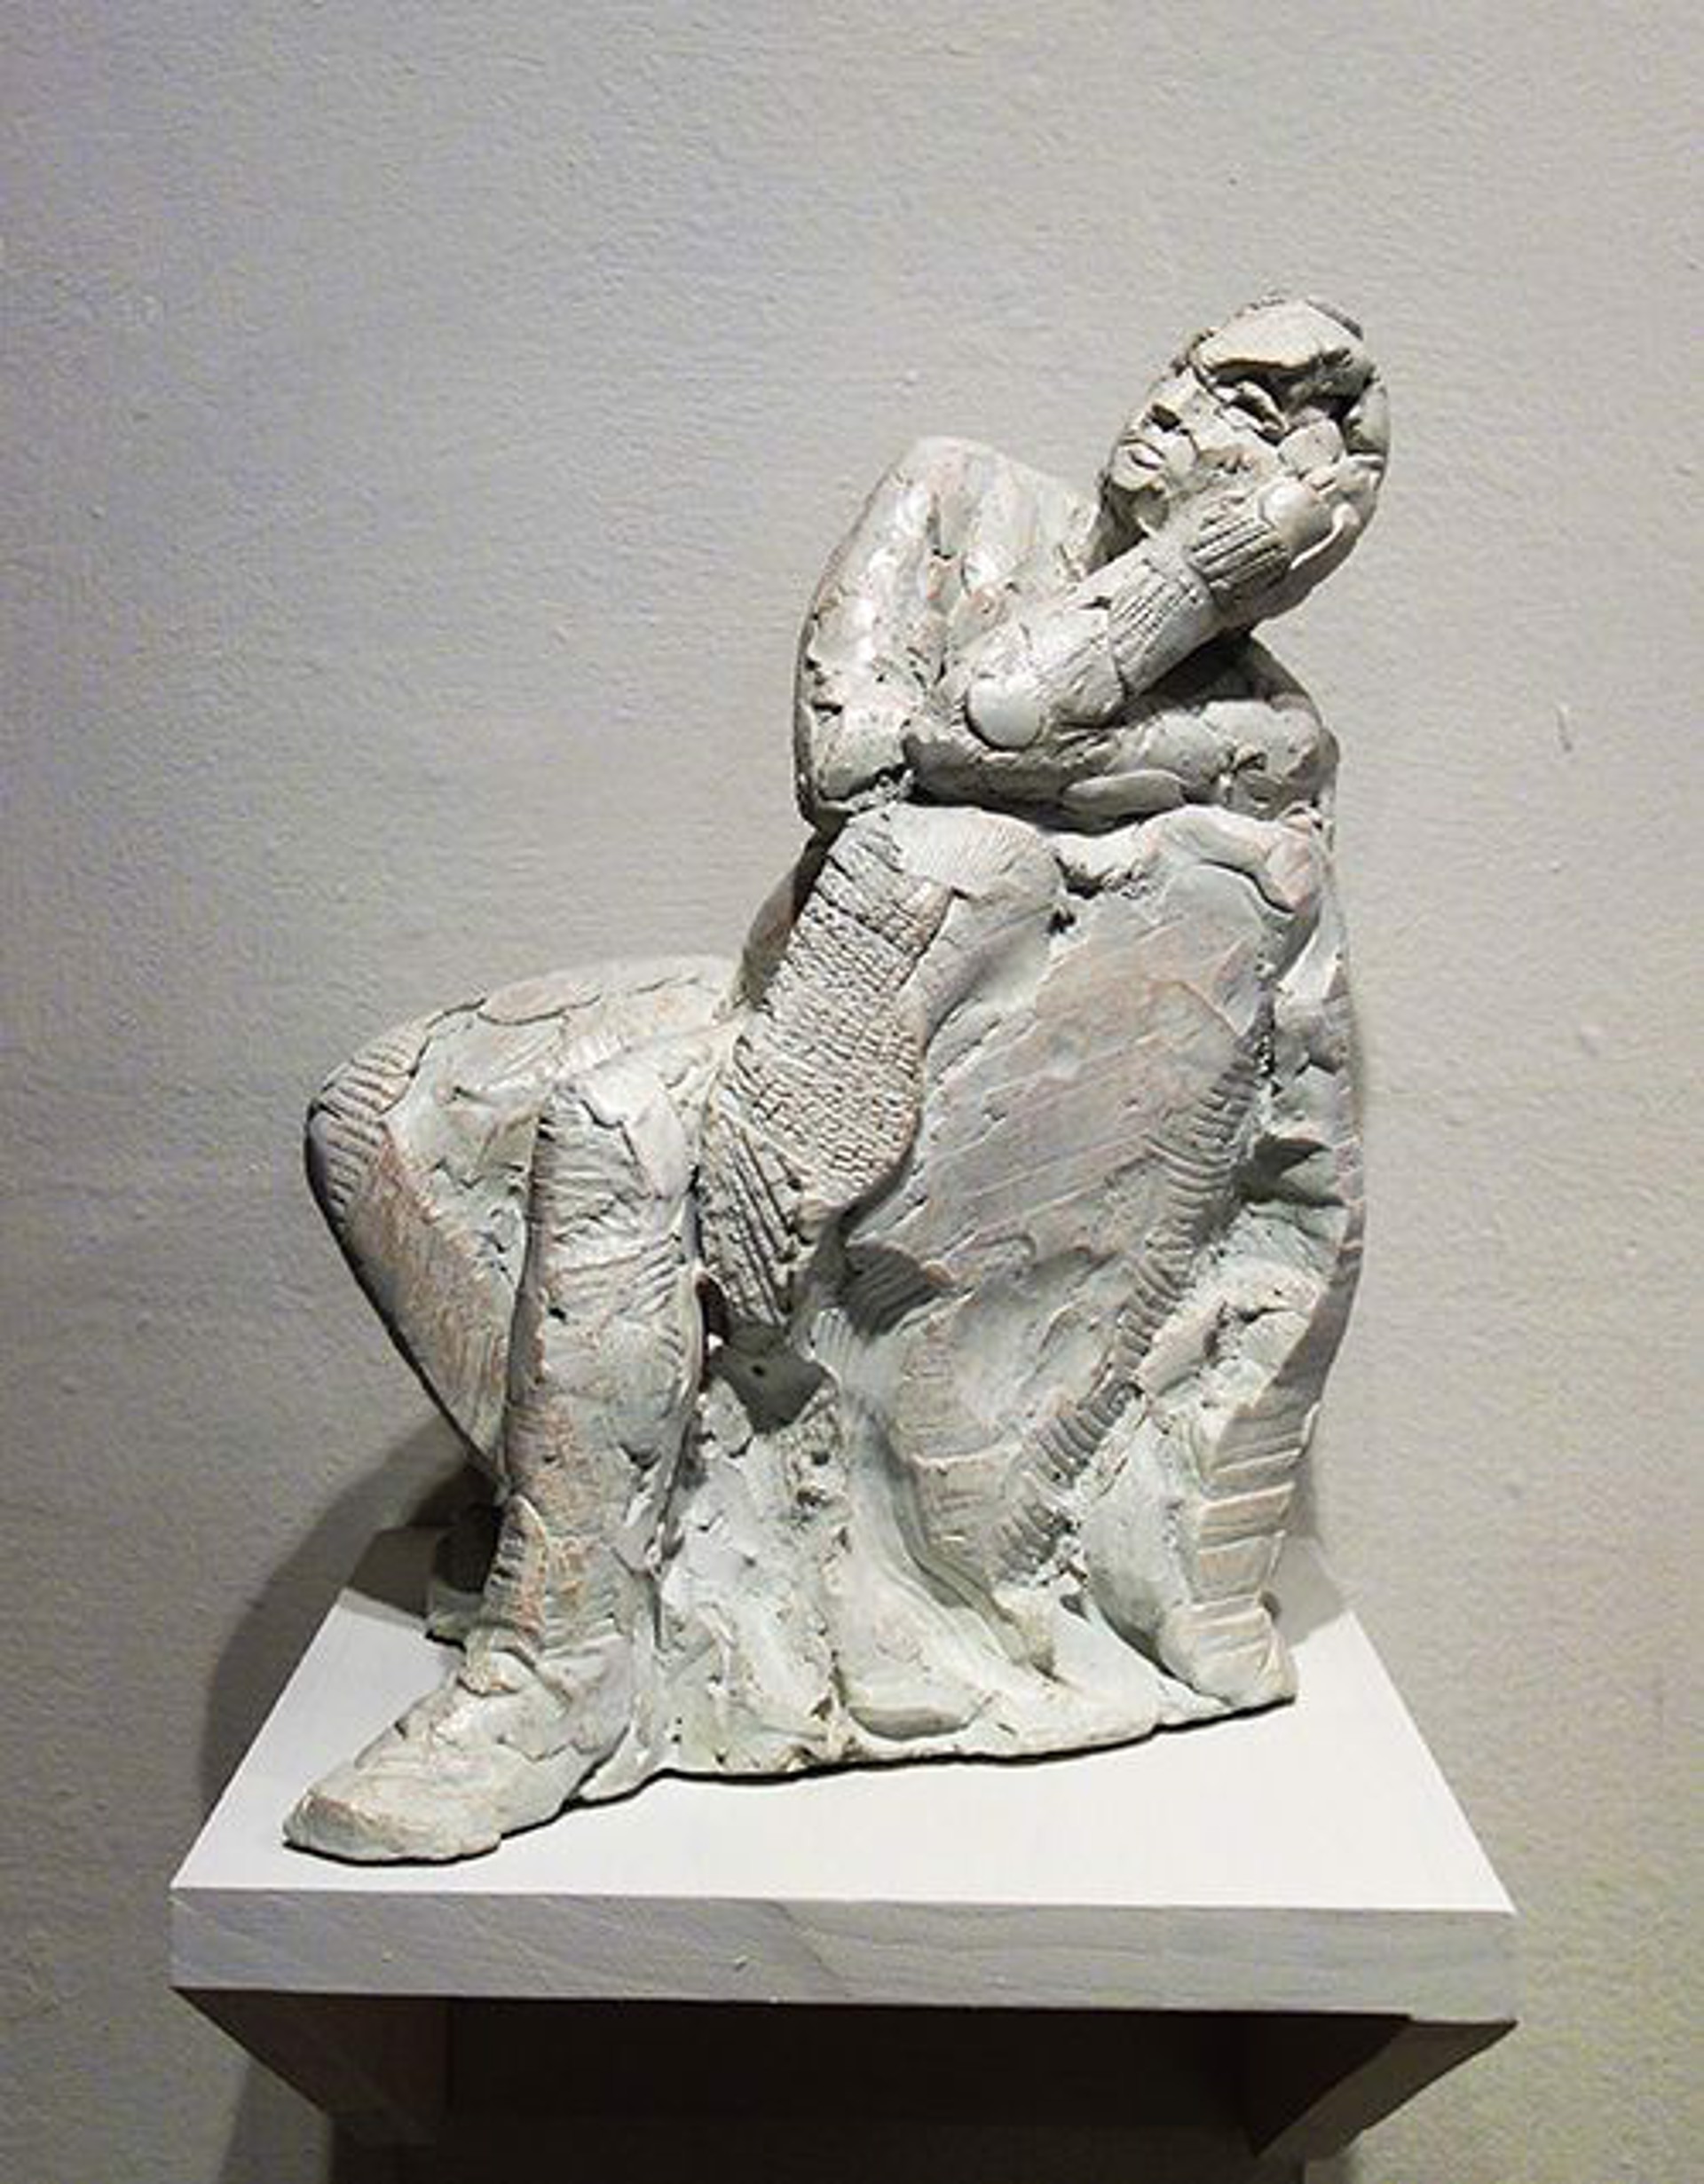 Seated Male by Michael O'Keefe